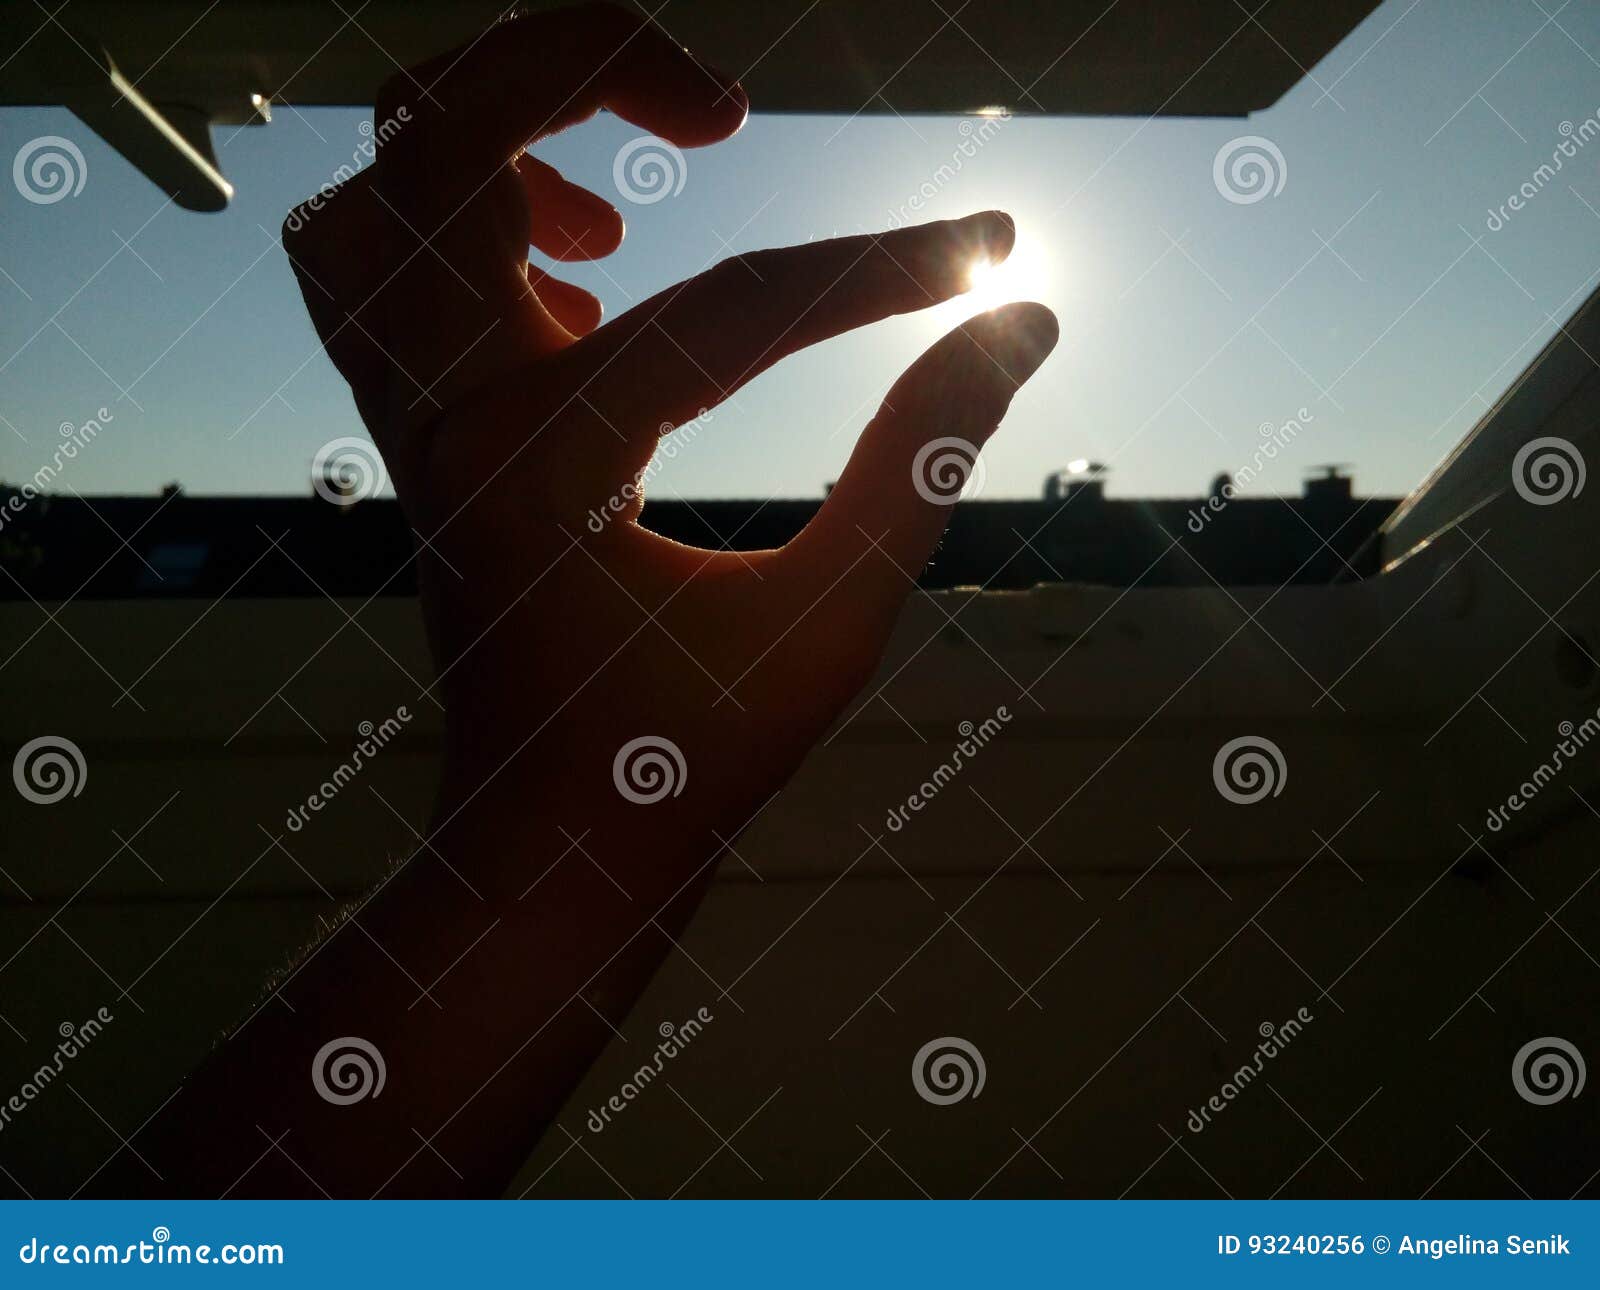 sun catch with fingers